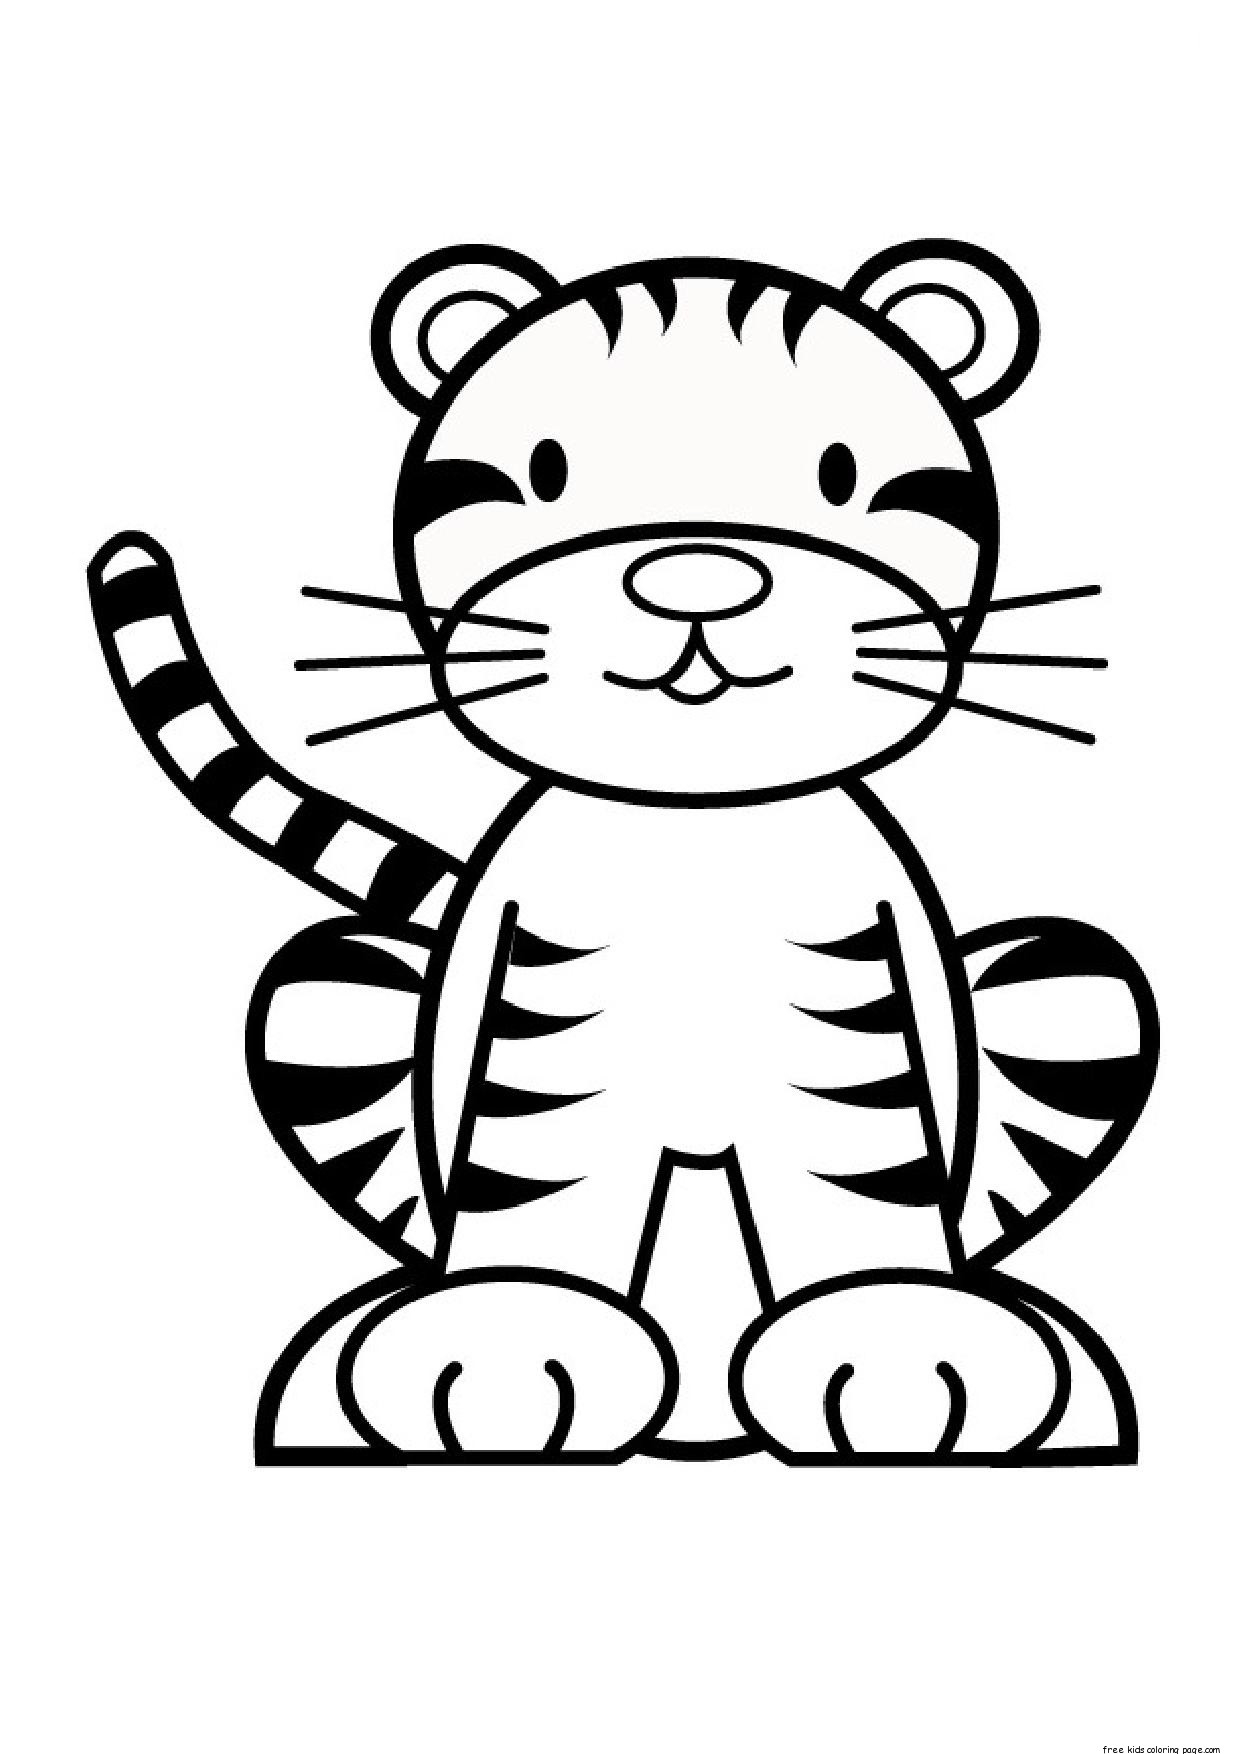 Coloring Pages Of Cute Tigers Tiger Coloring Pages Free Download Best Tiger Coloring Pages On